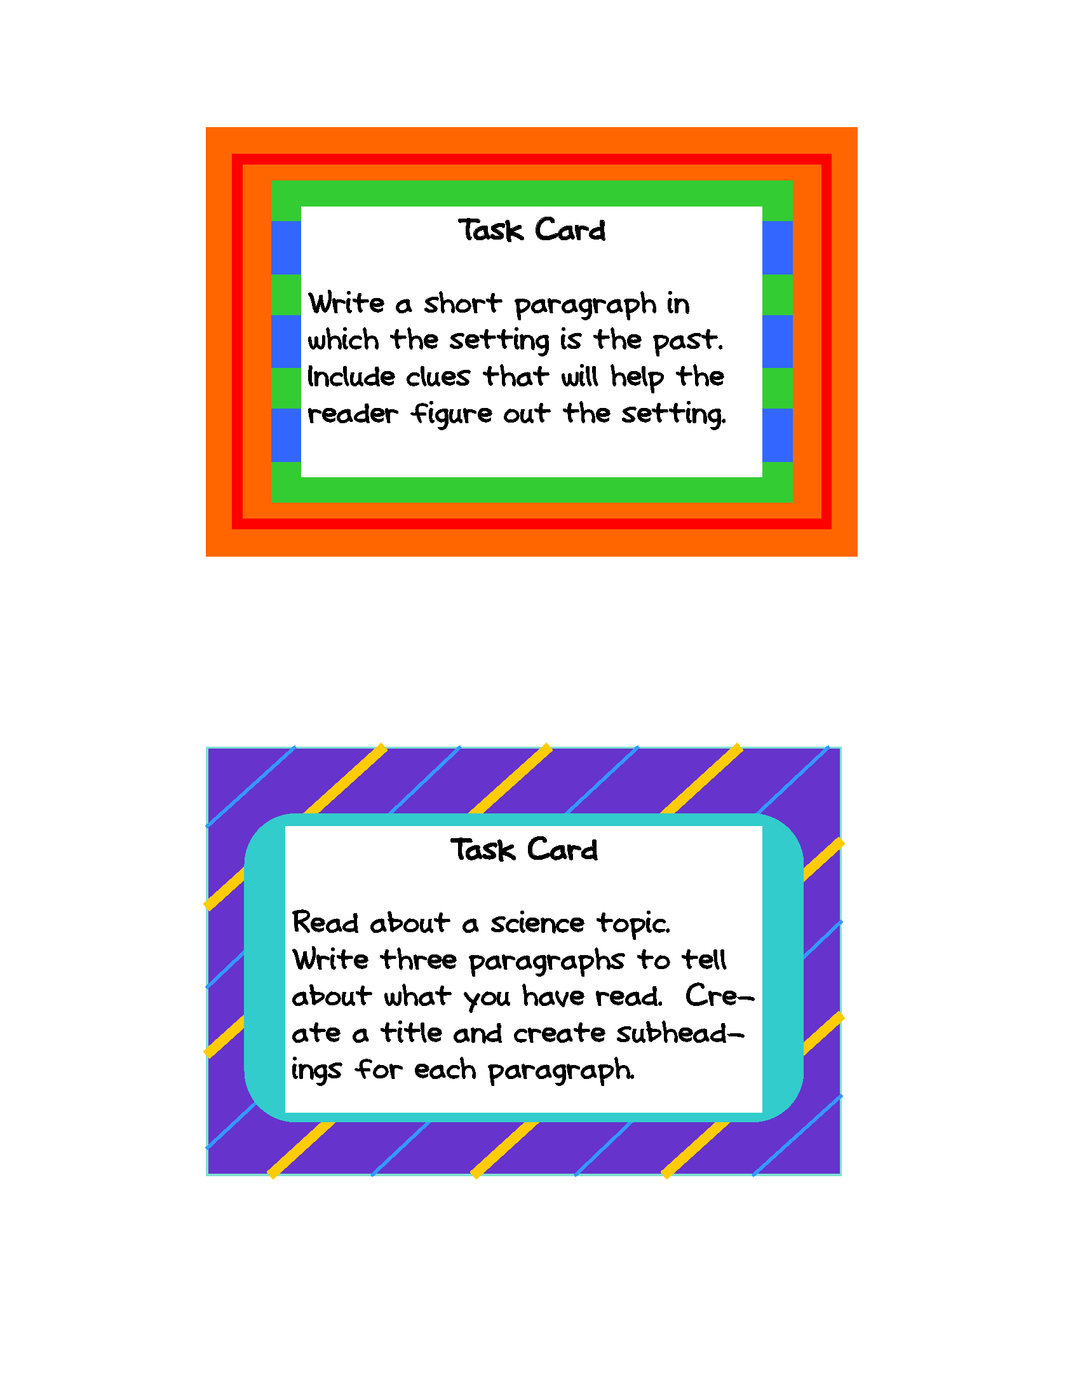 Marvin's Messy Room: Inference Learning Center & Task Cards